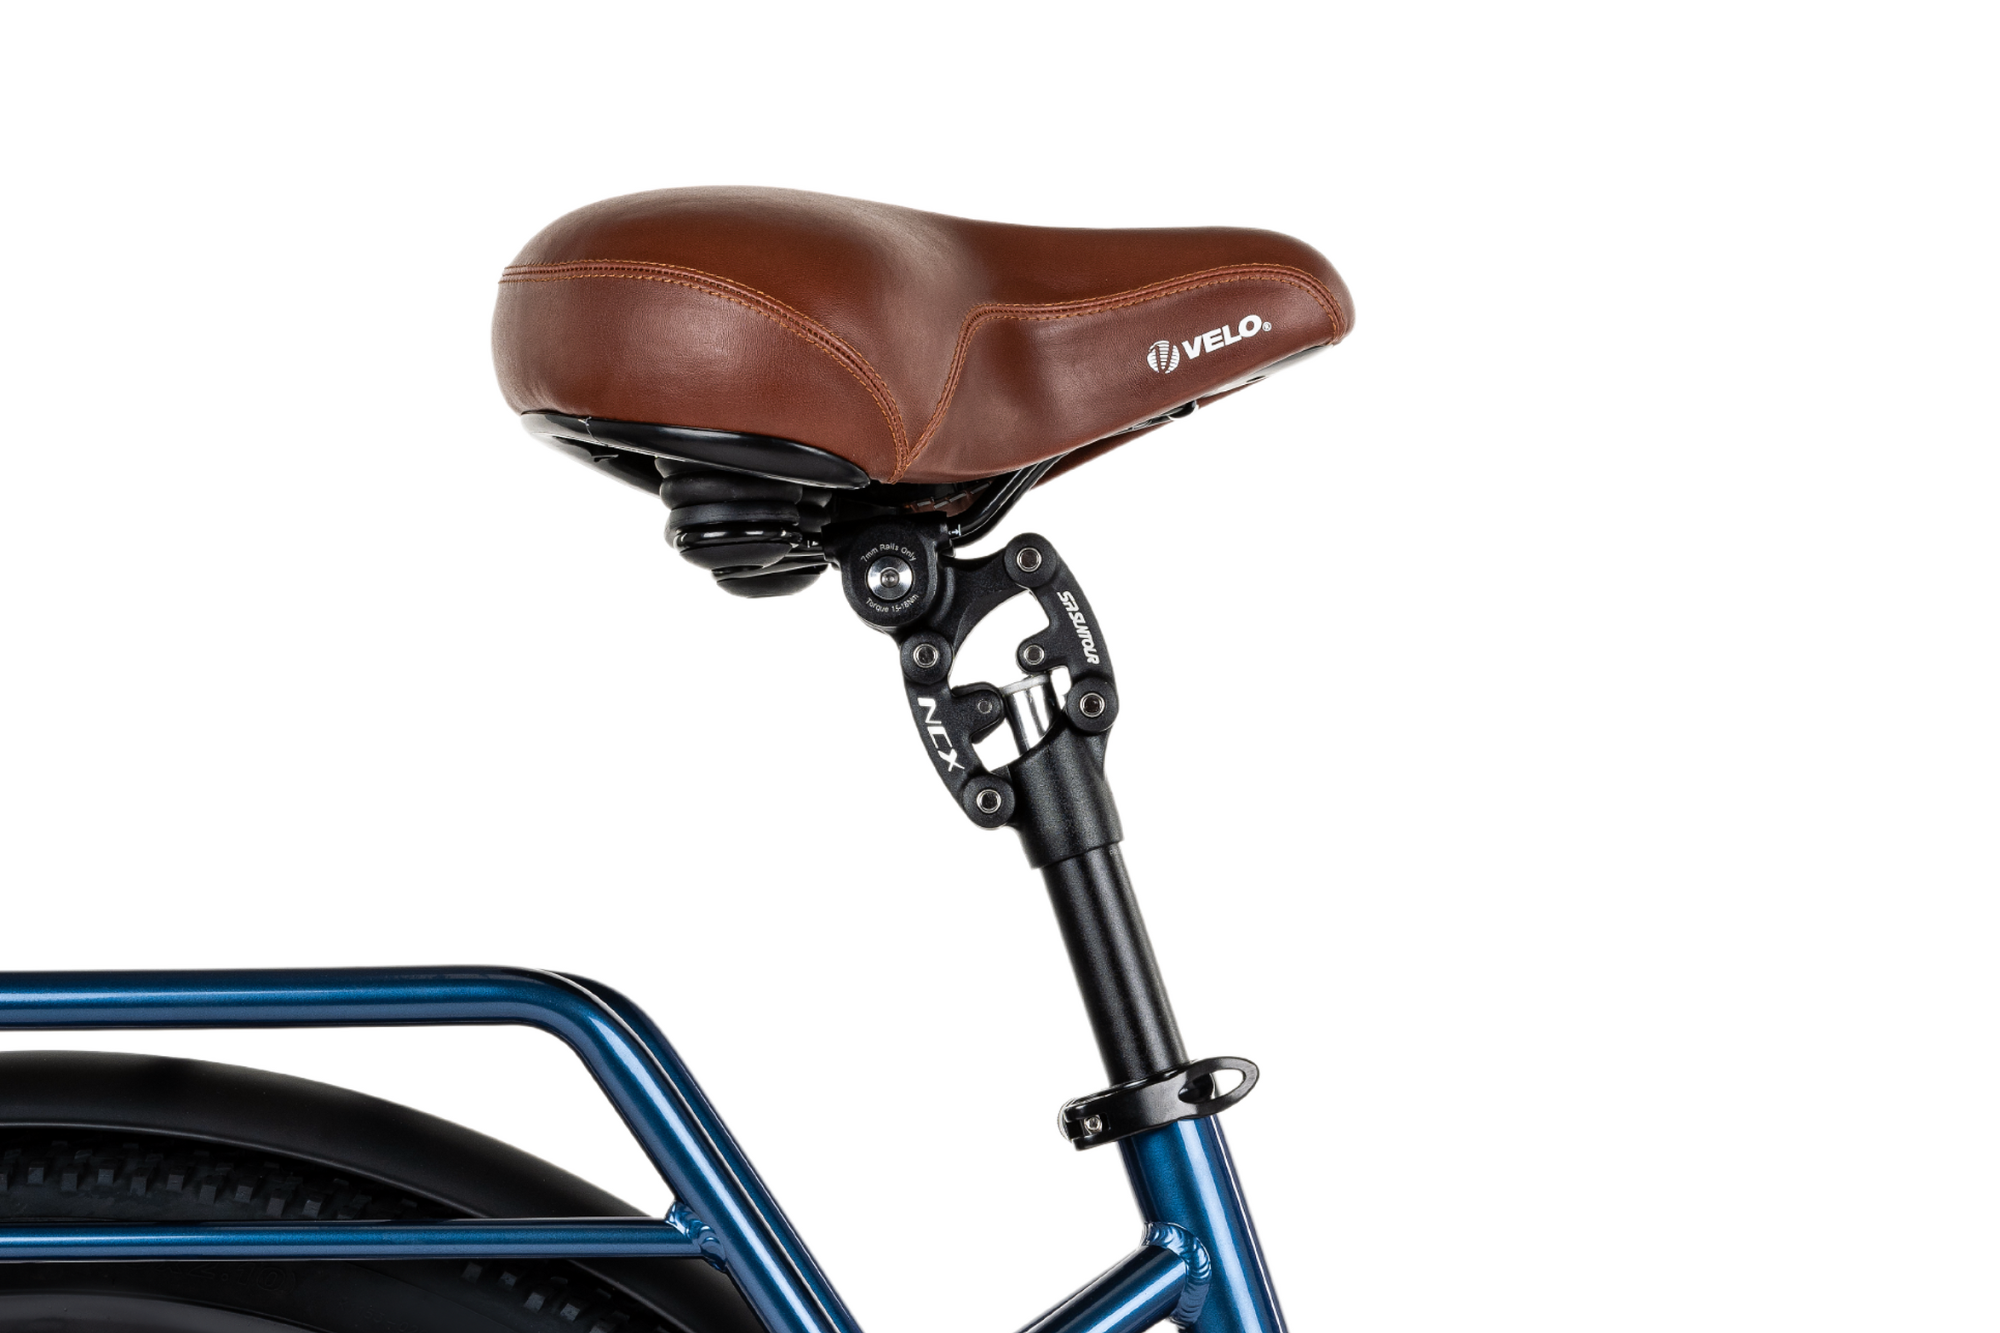 A wide saddle, it promises a more comfortable experience than the standard bicycle seat. Enjoy an extra layer of soft, supportive memory foam padding, a vacuum-formed, waterproof exterior, and elastomer spring rails to help smooth out bumps in the road